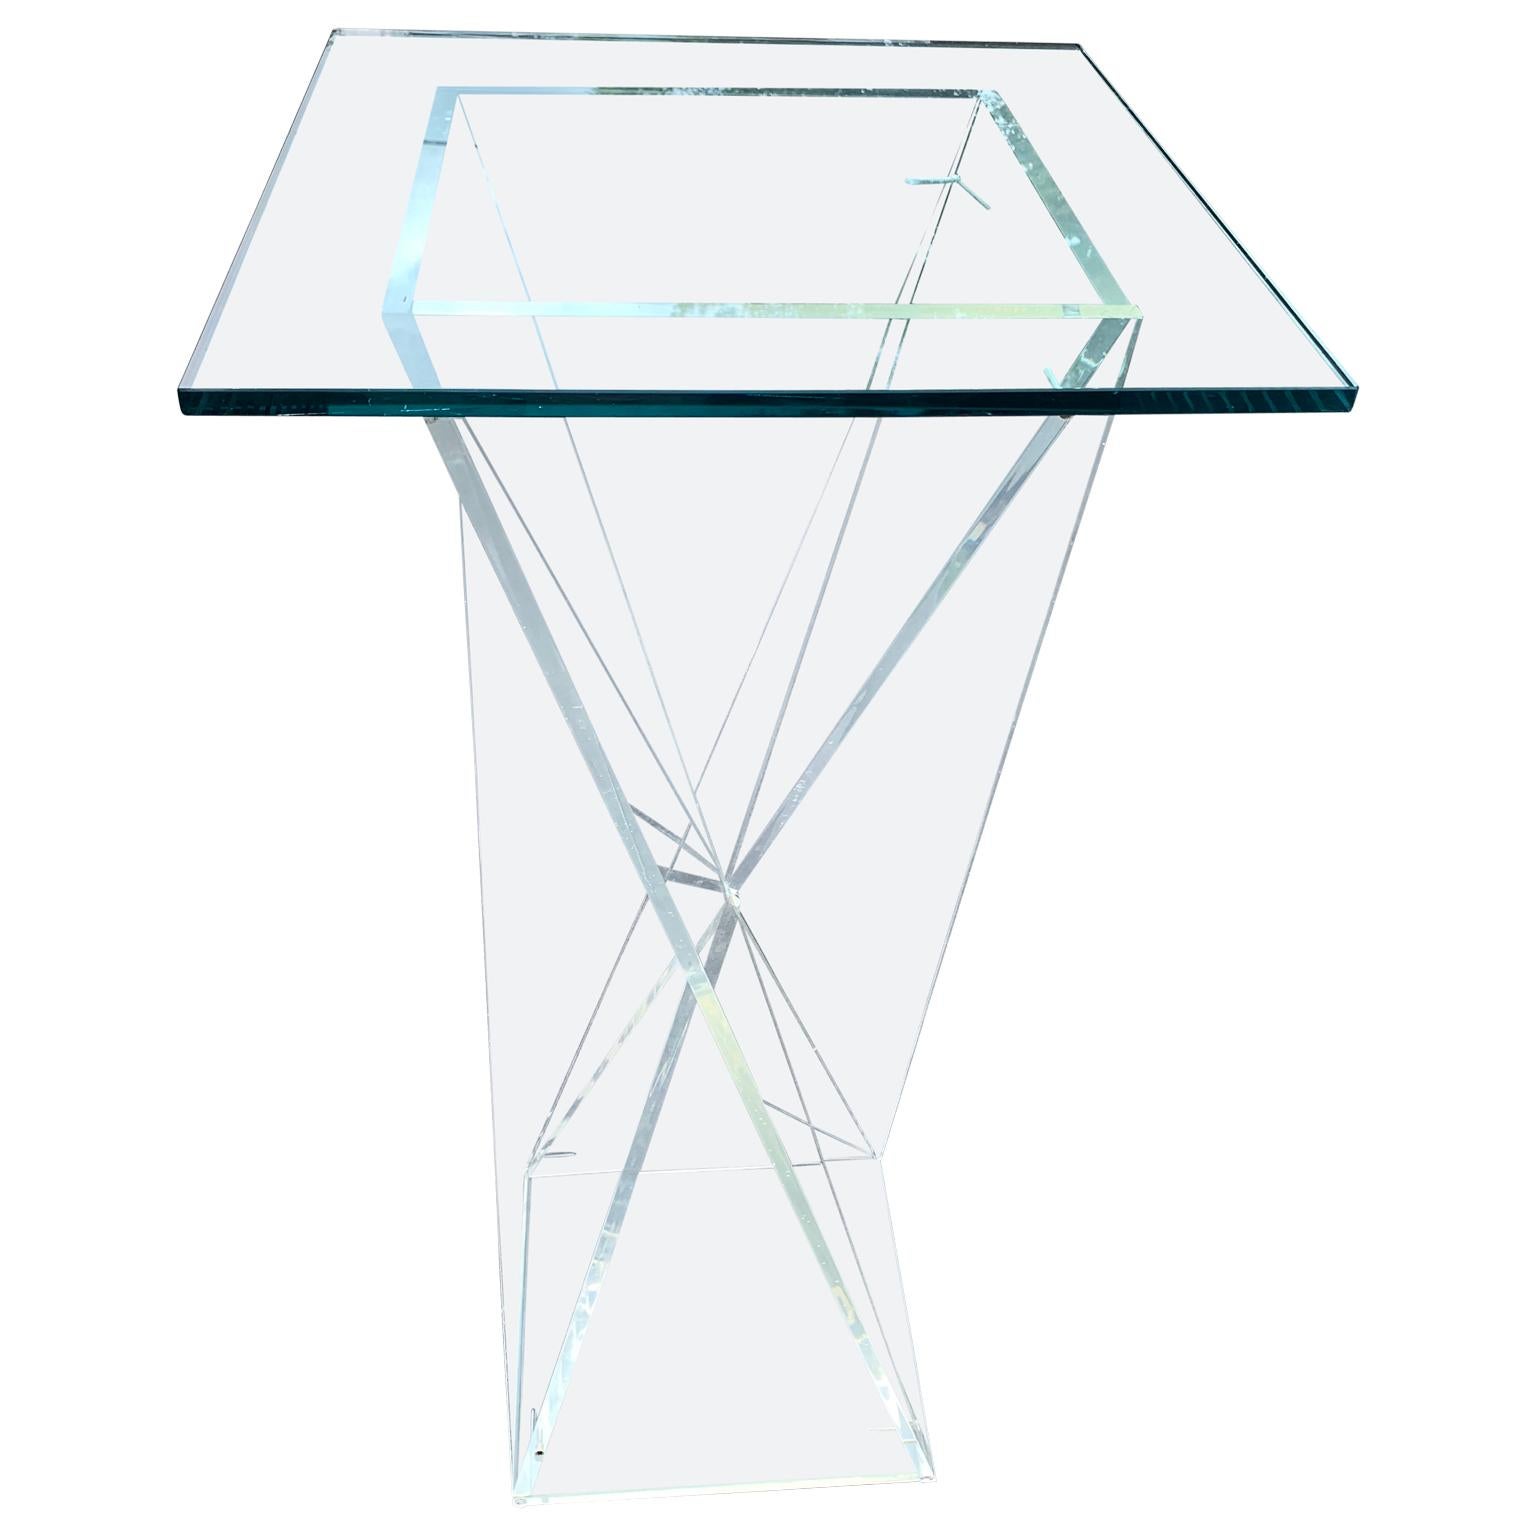 Square Mid-Century Modern Lucite Pedestal Table

Pedestal is sold without the glass top illustrated 

Pedestal is sold with a square glass top.